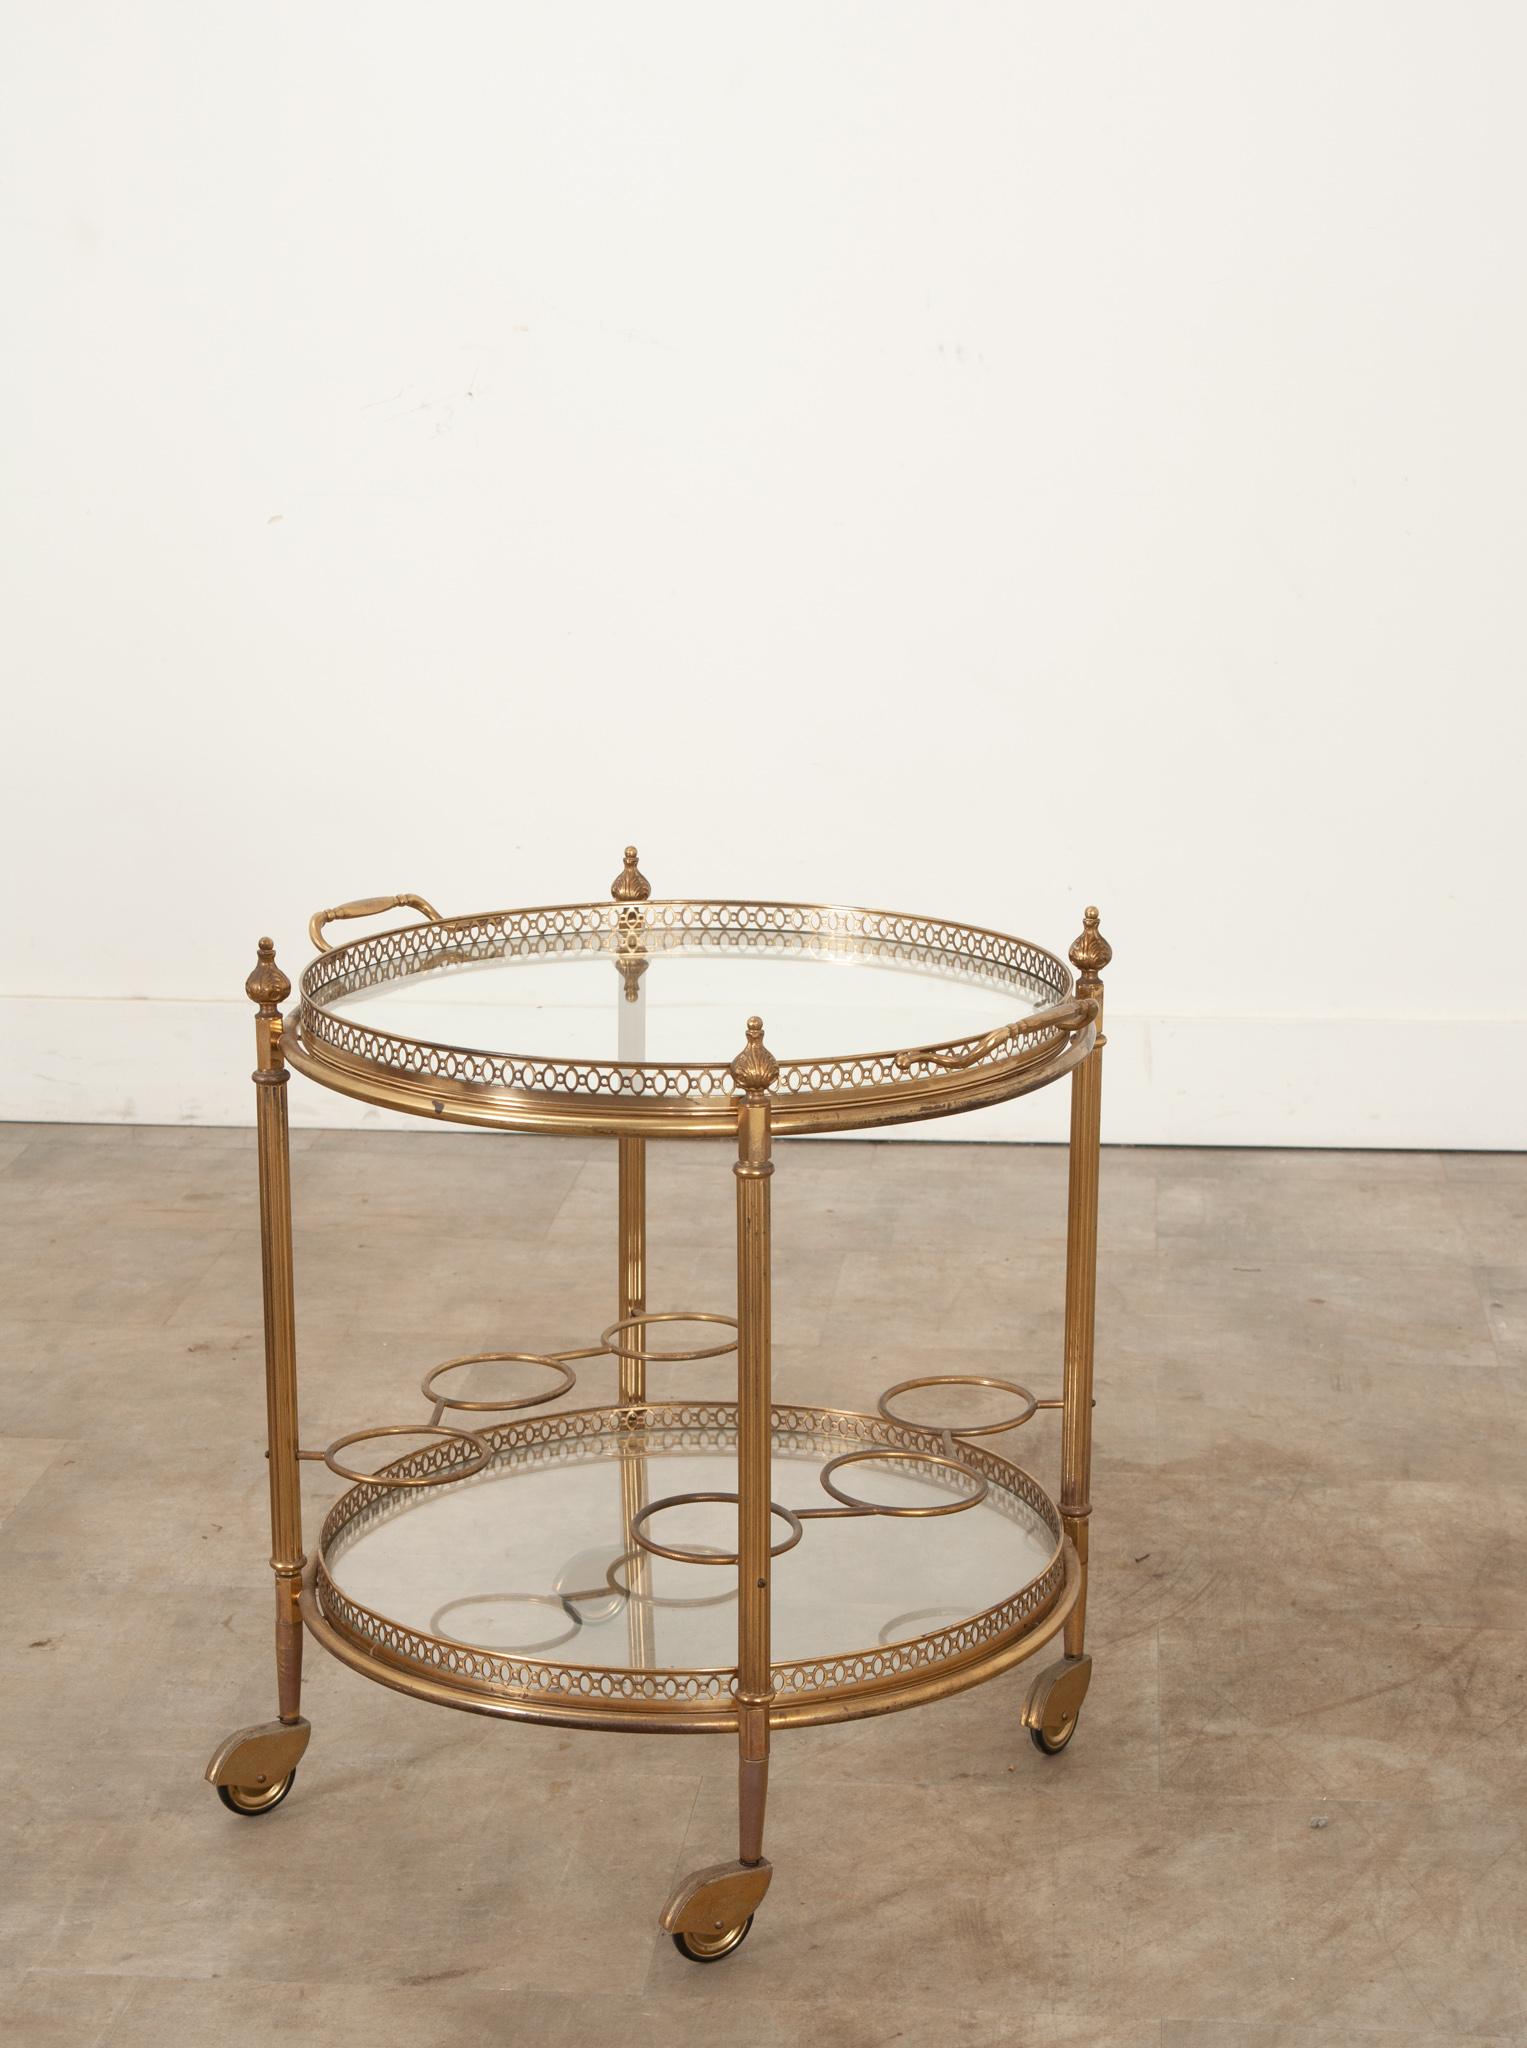 An elegant brass bar cart or trolley is the perfect occasional table for your interior. This rounded and tiered bar cart features two circular glass surfaces surrounded with pierced brass galleries. The top tier doubles as a removable serving tray